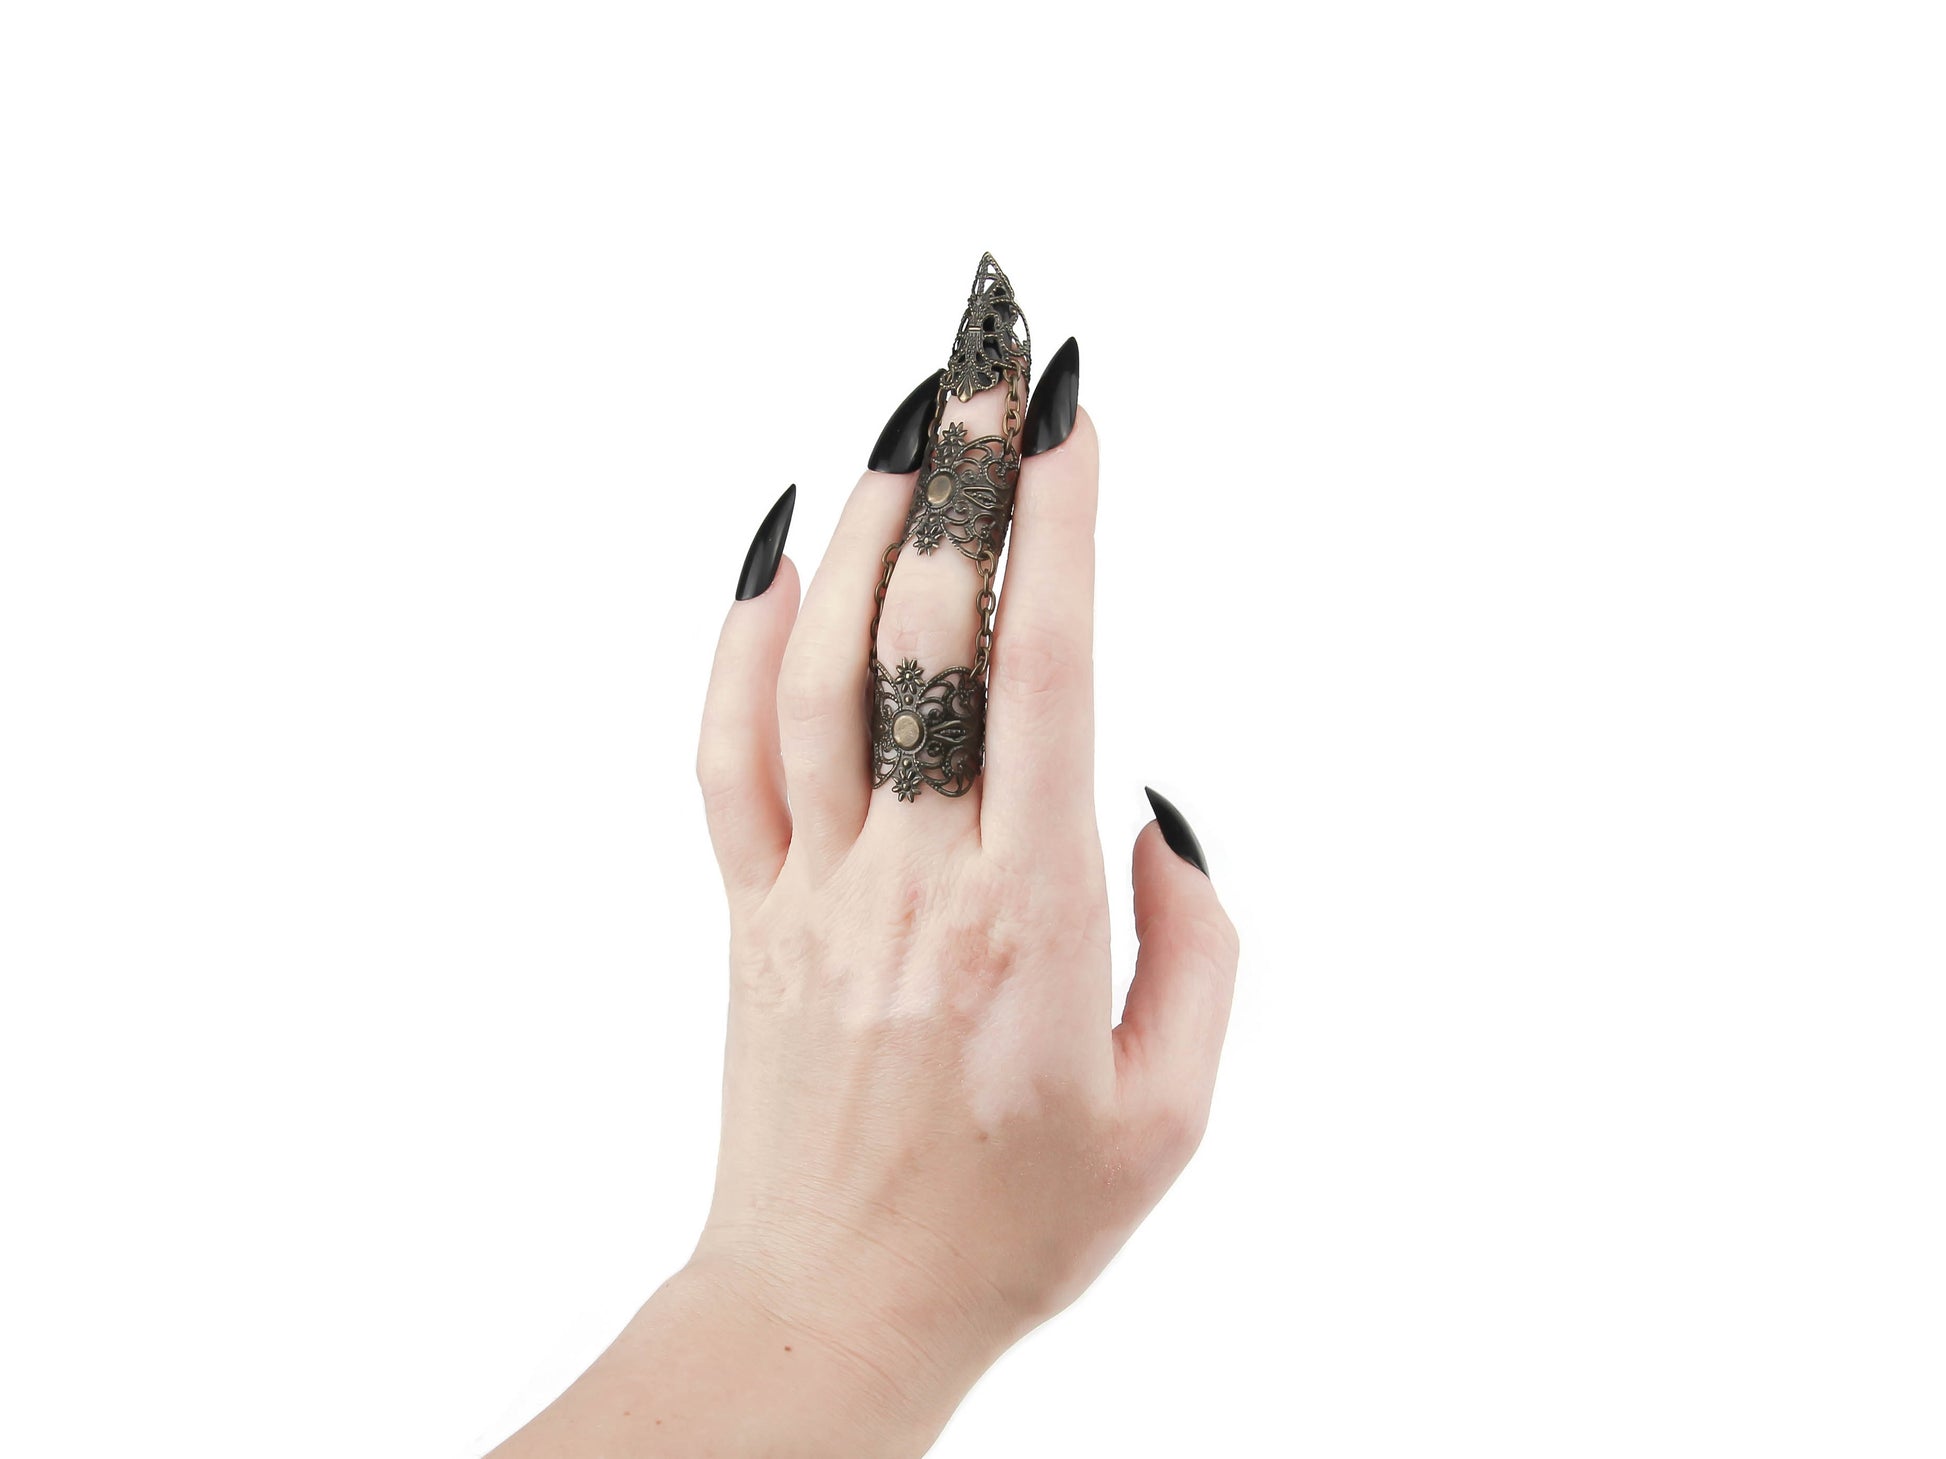 A hand models an intricate bronze full finger claw ring by Myril Jewels, featuring a dramatic black filigree design that complements the neo-goth aesthetic. This bold piece is perfect for those seeking gothic-chic Halloween jewelry or a unique, statement accessory for minimal goth or witchcore fashion